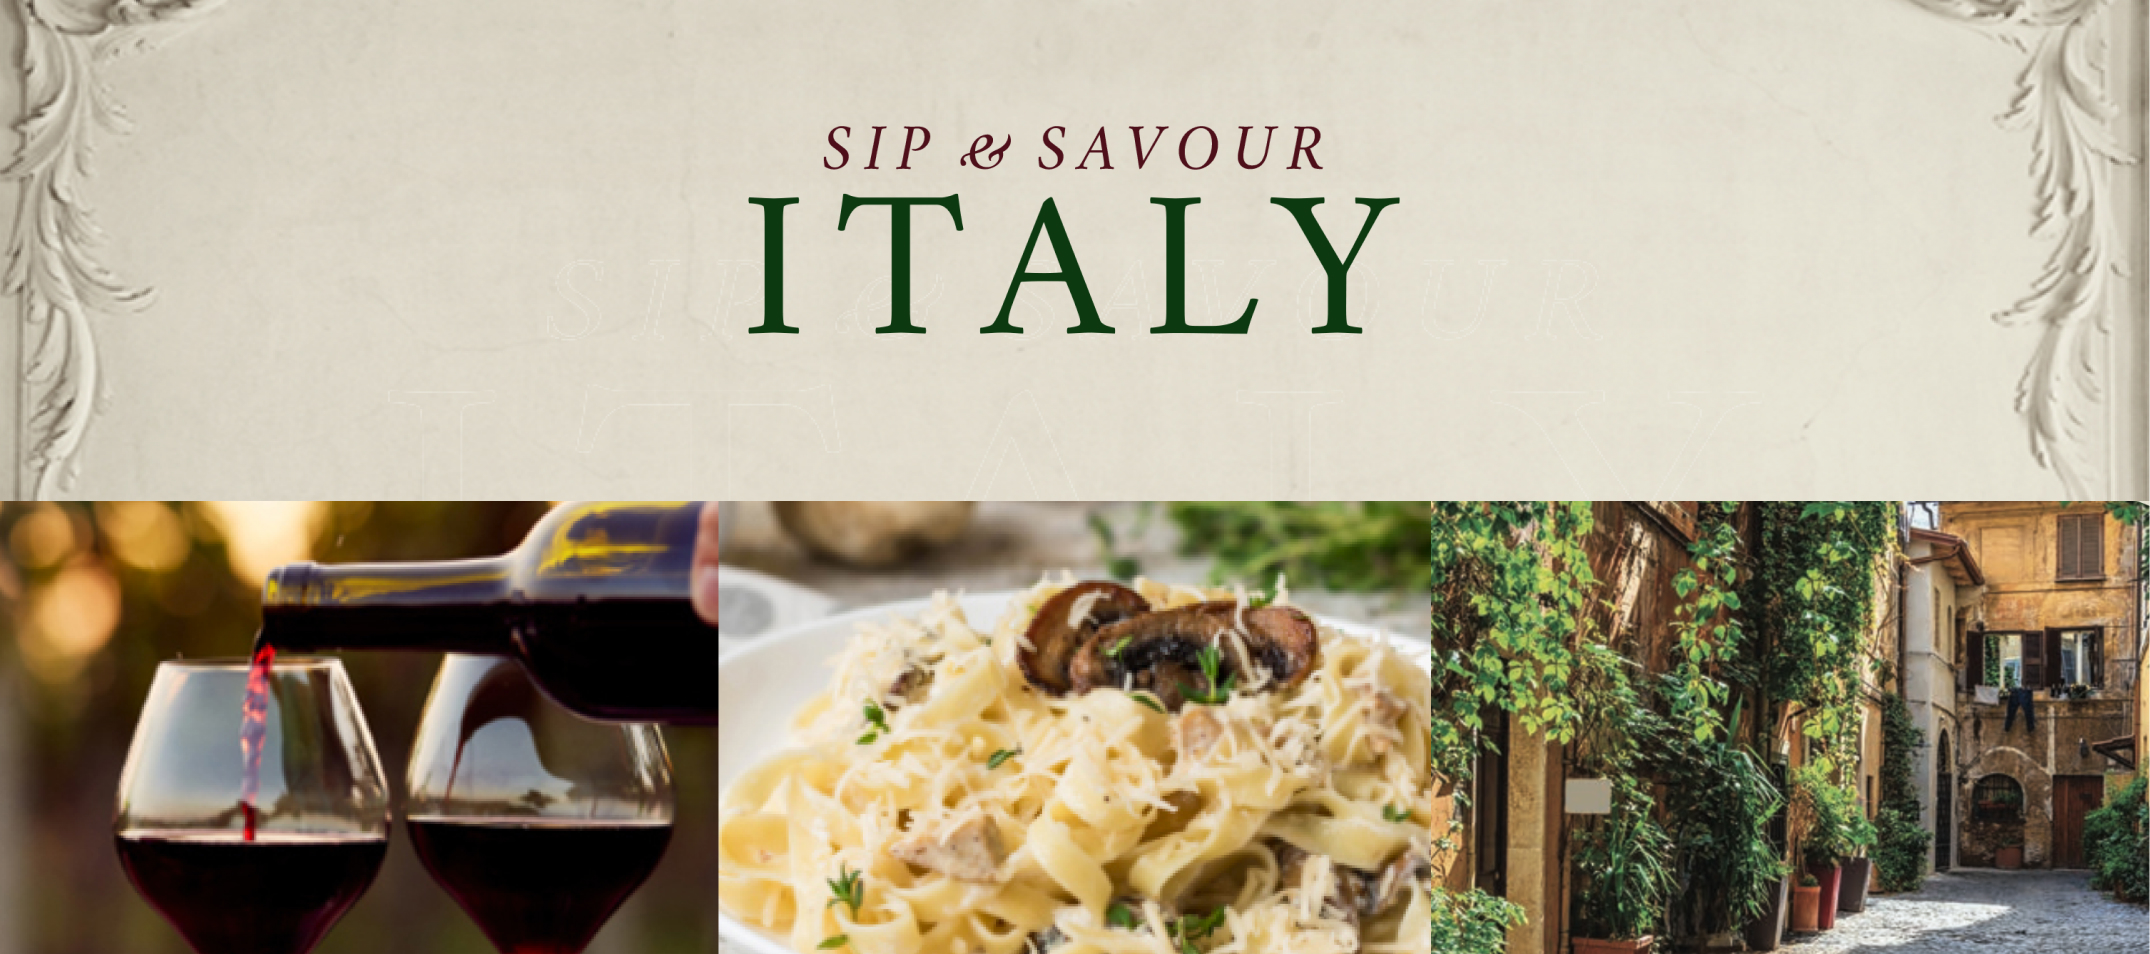 Sip and Savour Italy